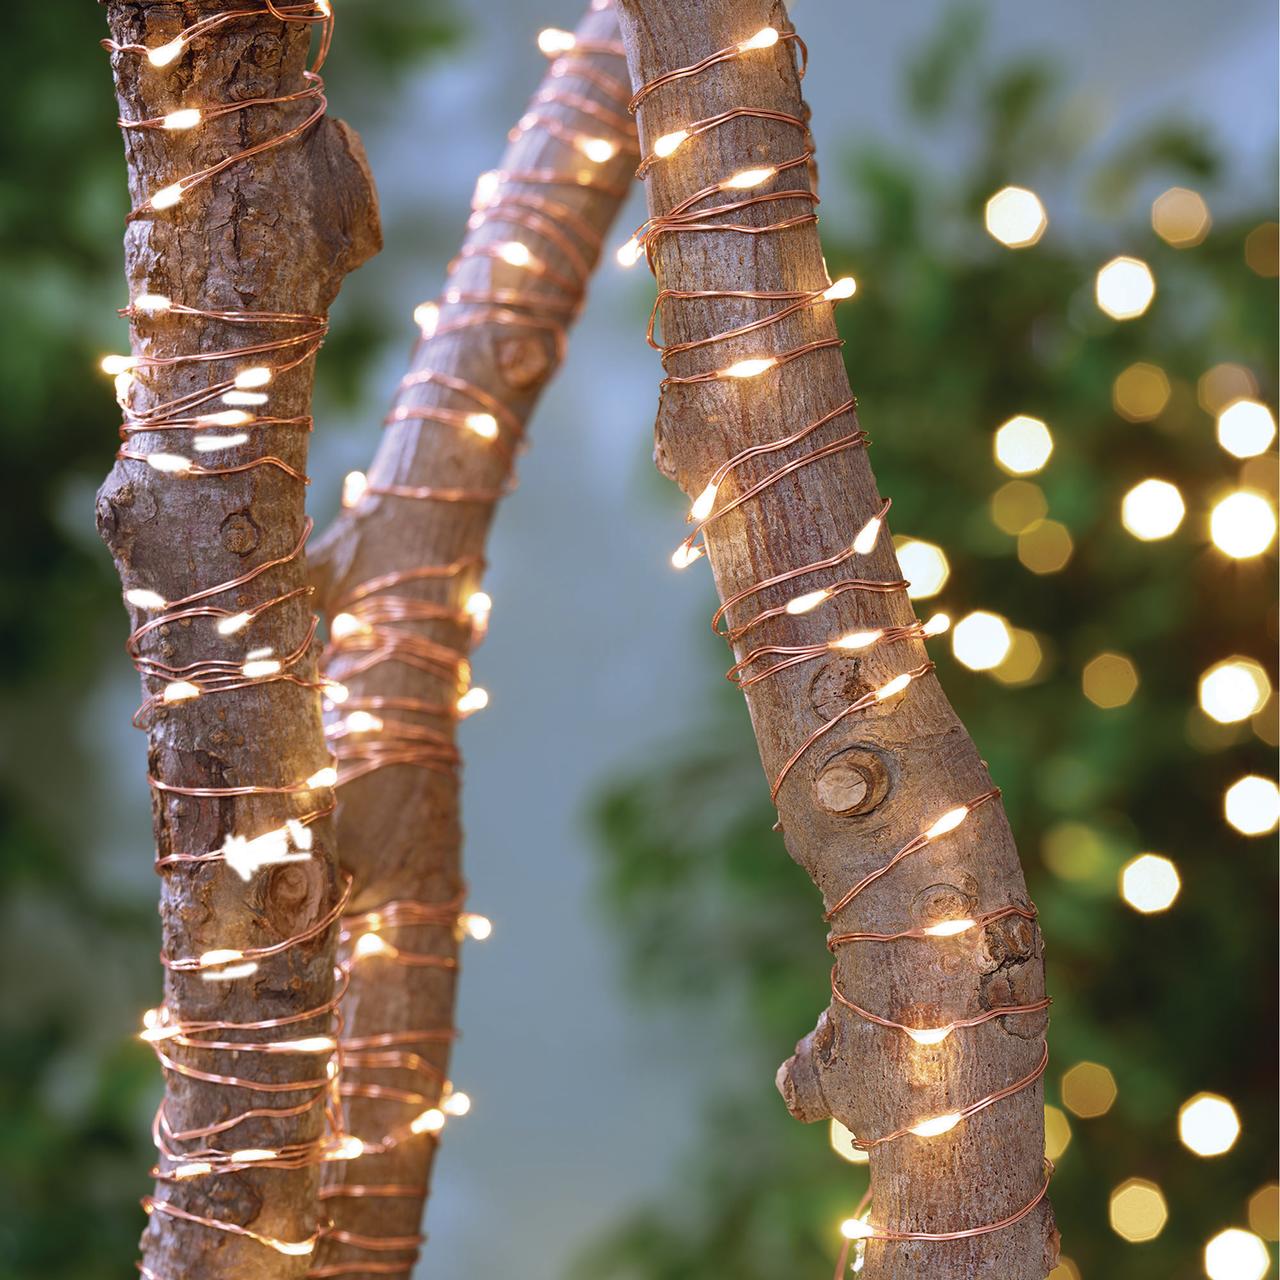 Better Homes & Gardens 36-Count LED Warm White Wire Outdoor String Lights with 8 Lighting Functions - image 3 of 8